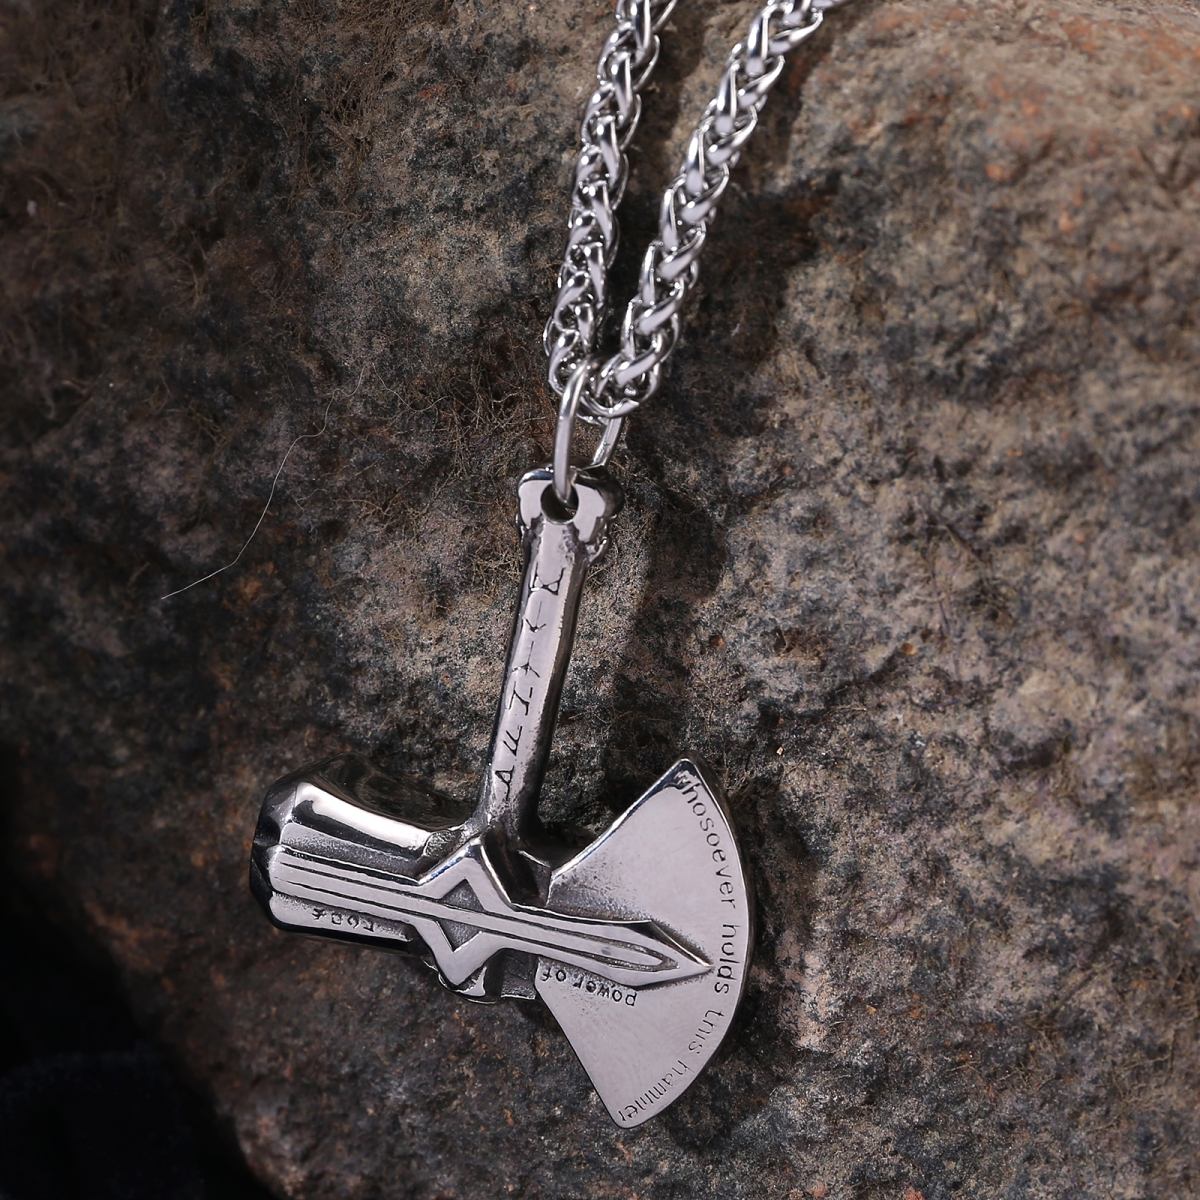 Axe Necklace US$2.9/PC-NORSECOLLECTION- Viking Jewelry,Viking Necklace,Viking Bracelet,Viking Rings,Viking Mugs,Viking Accessories,Viking Crafts